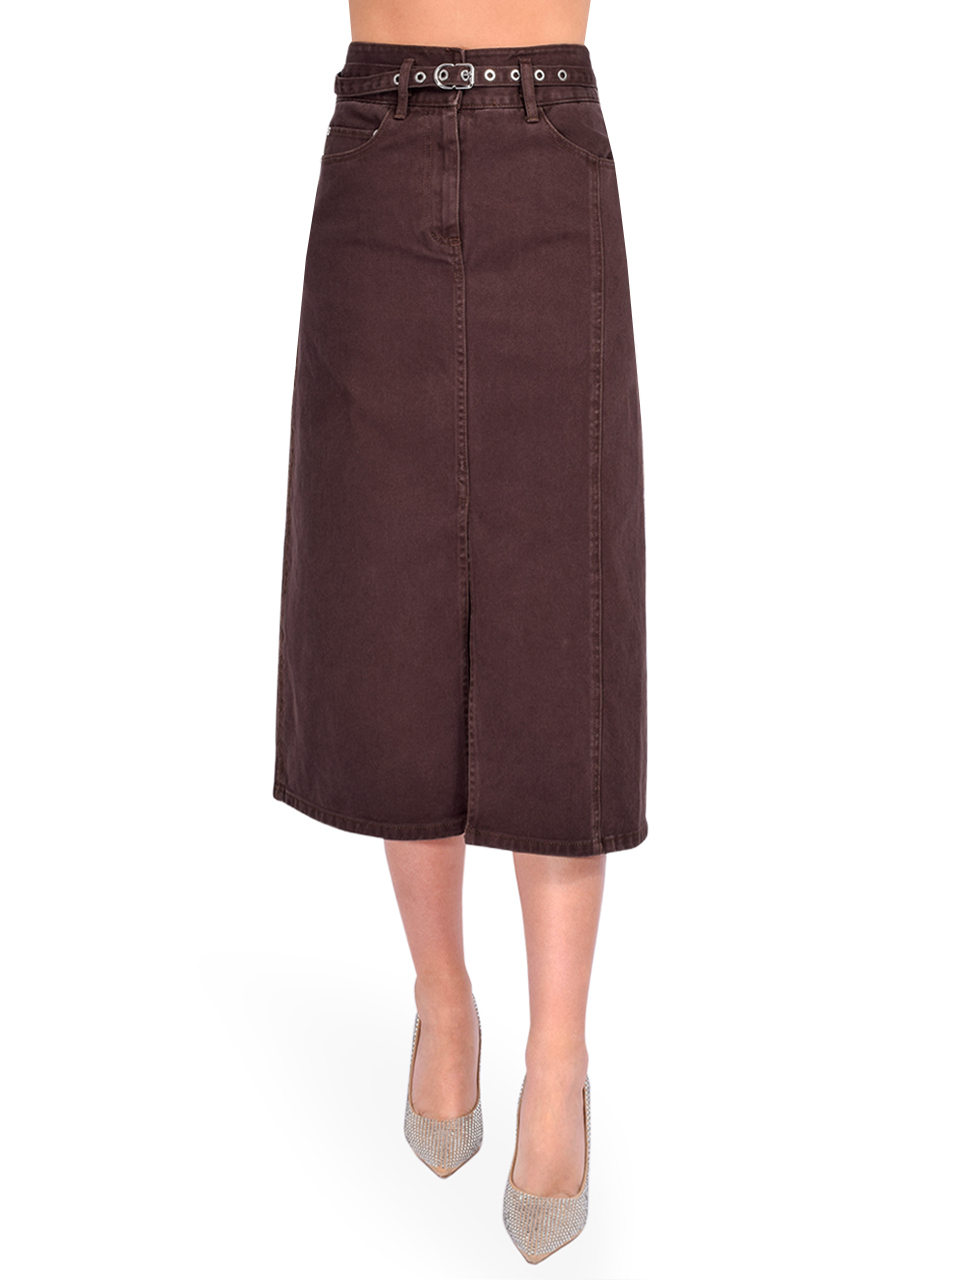 3.1 Phillip Lim Denim A-Line Skirt in Coffee Front View 